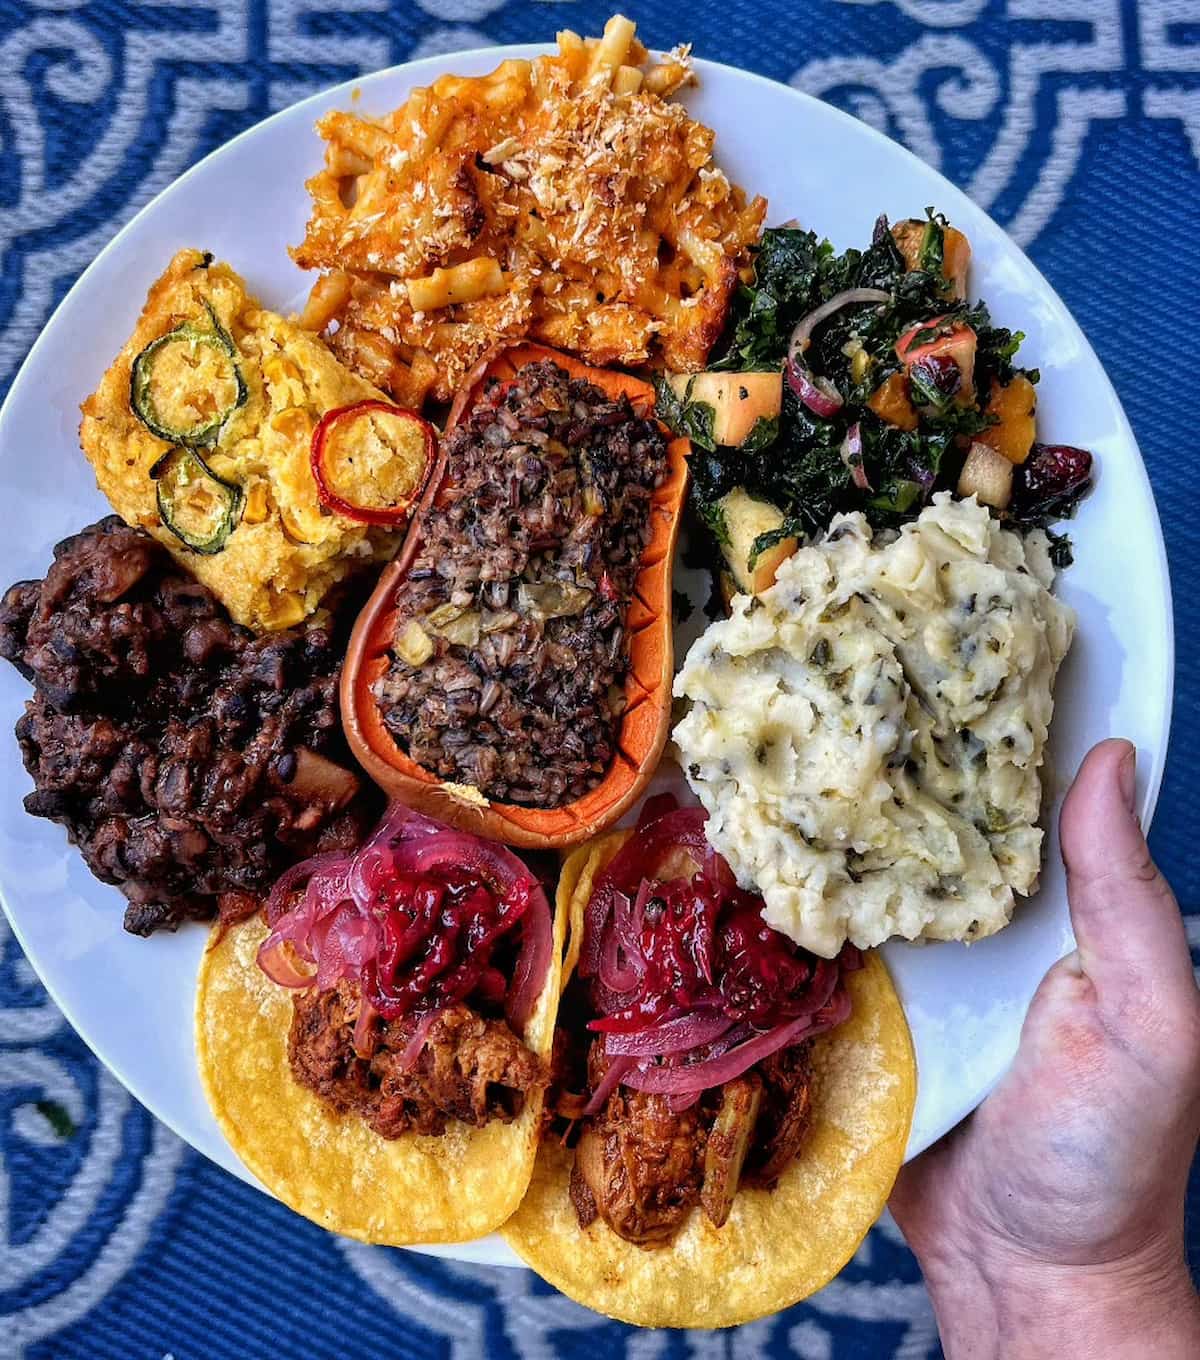 A plate of vegan Thanksgiving food including mashed potatoes, stuffed butternut squash, tacos, and various casseroles and salad.